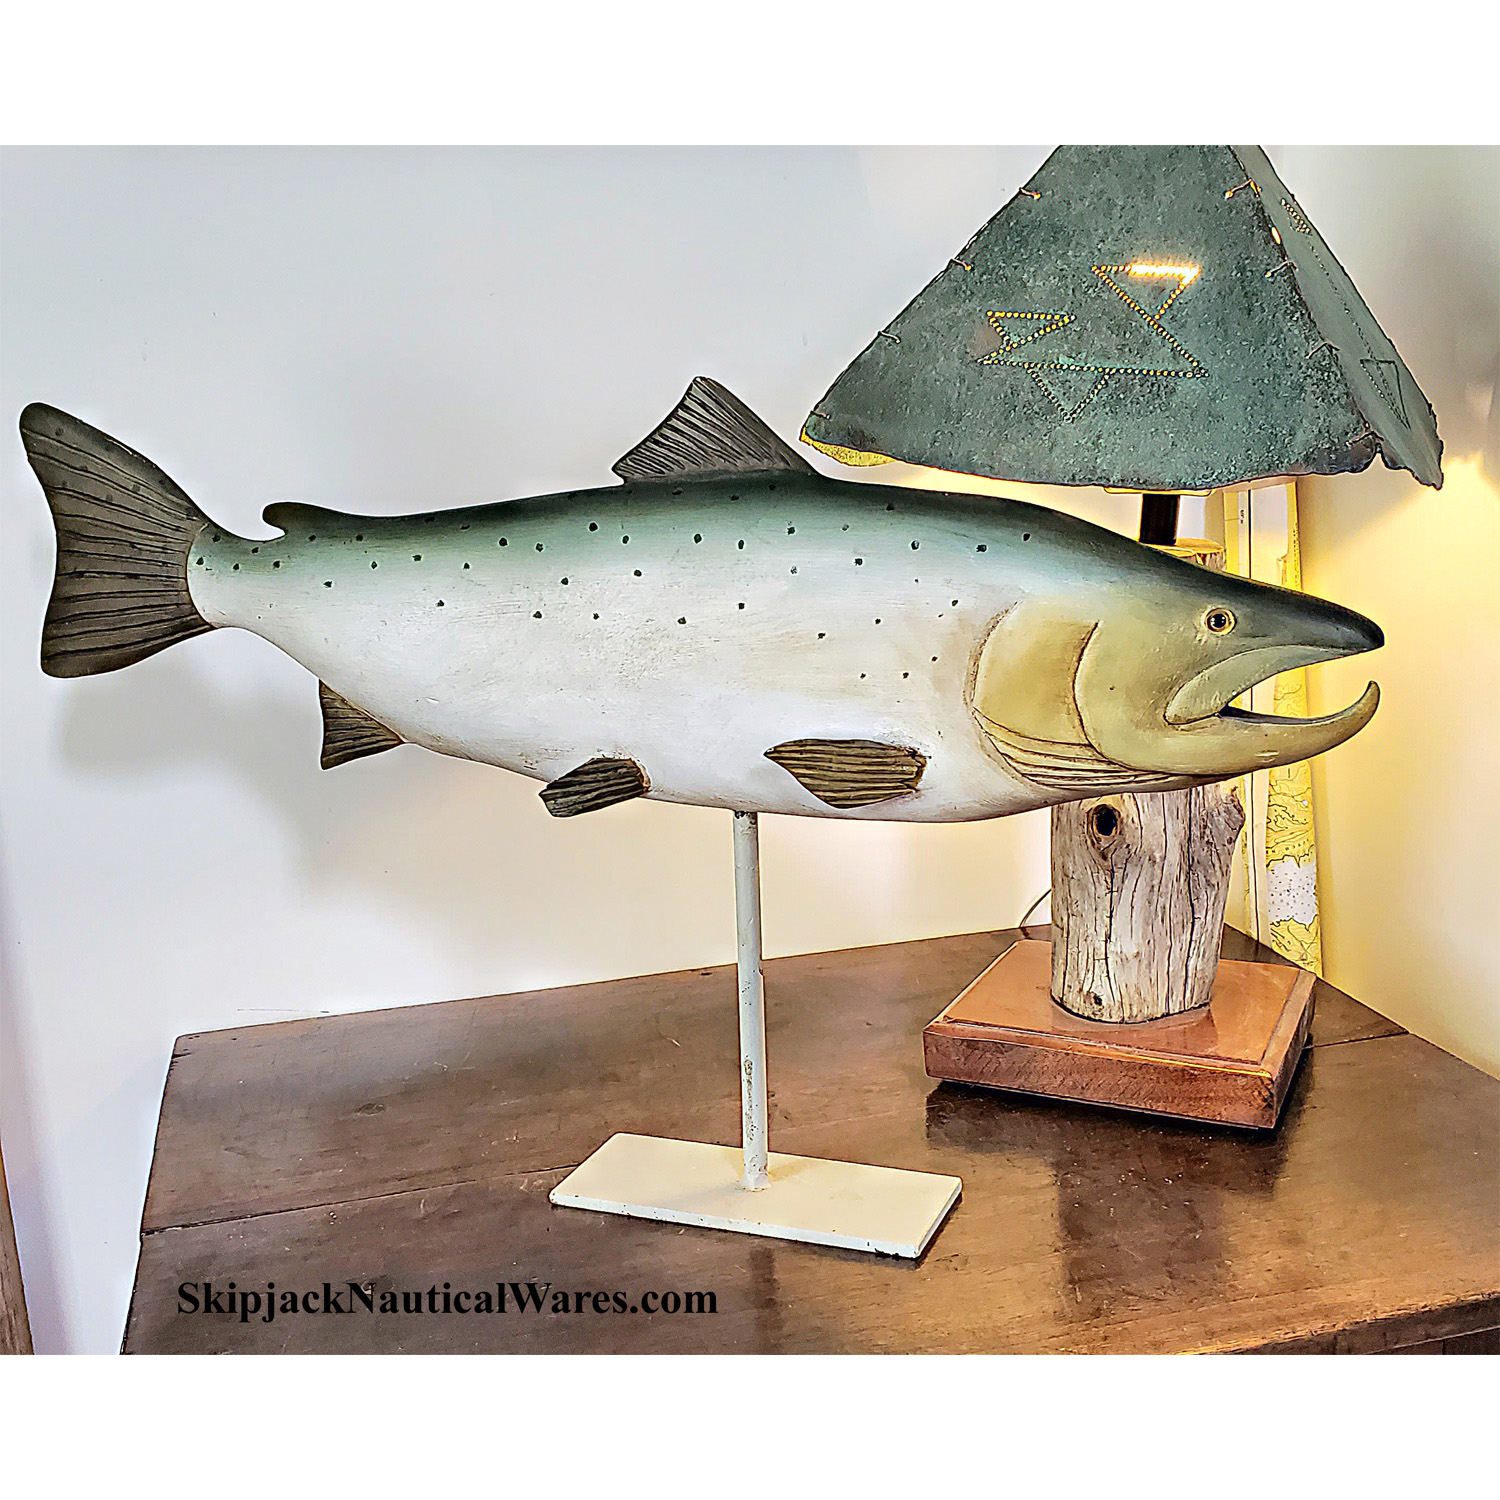 Carved and Painted Wood Rainbow Trout: Skipjack Nautical Wares